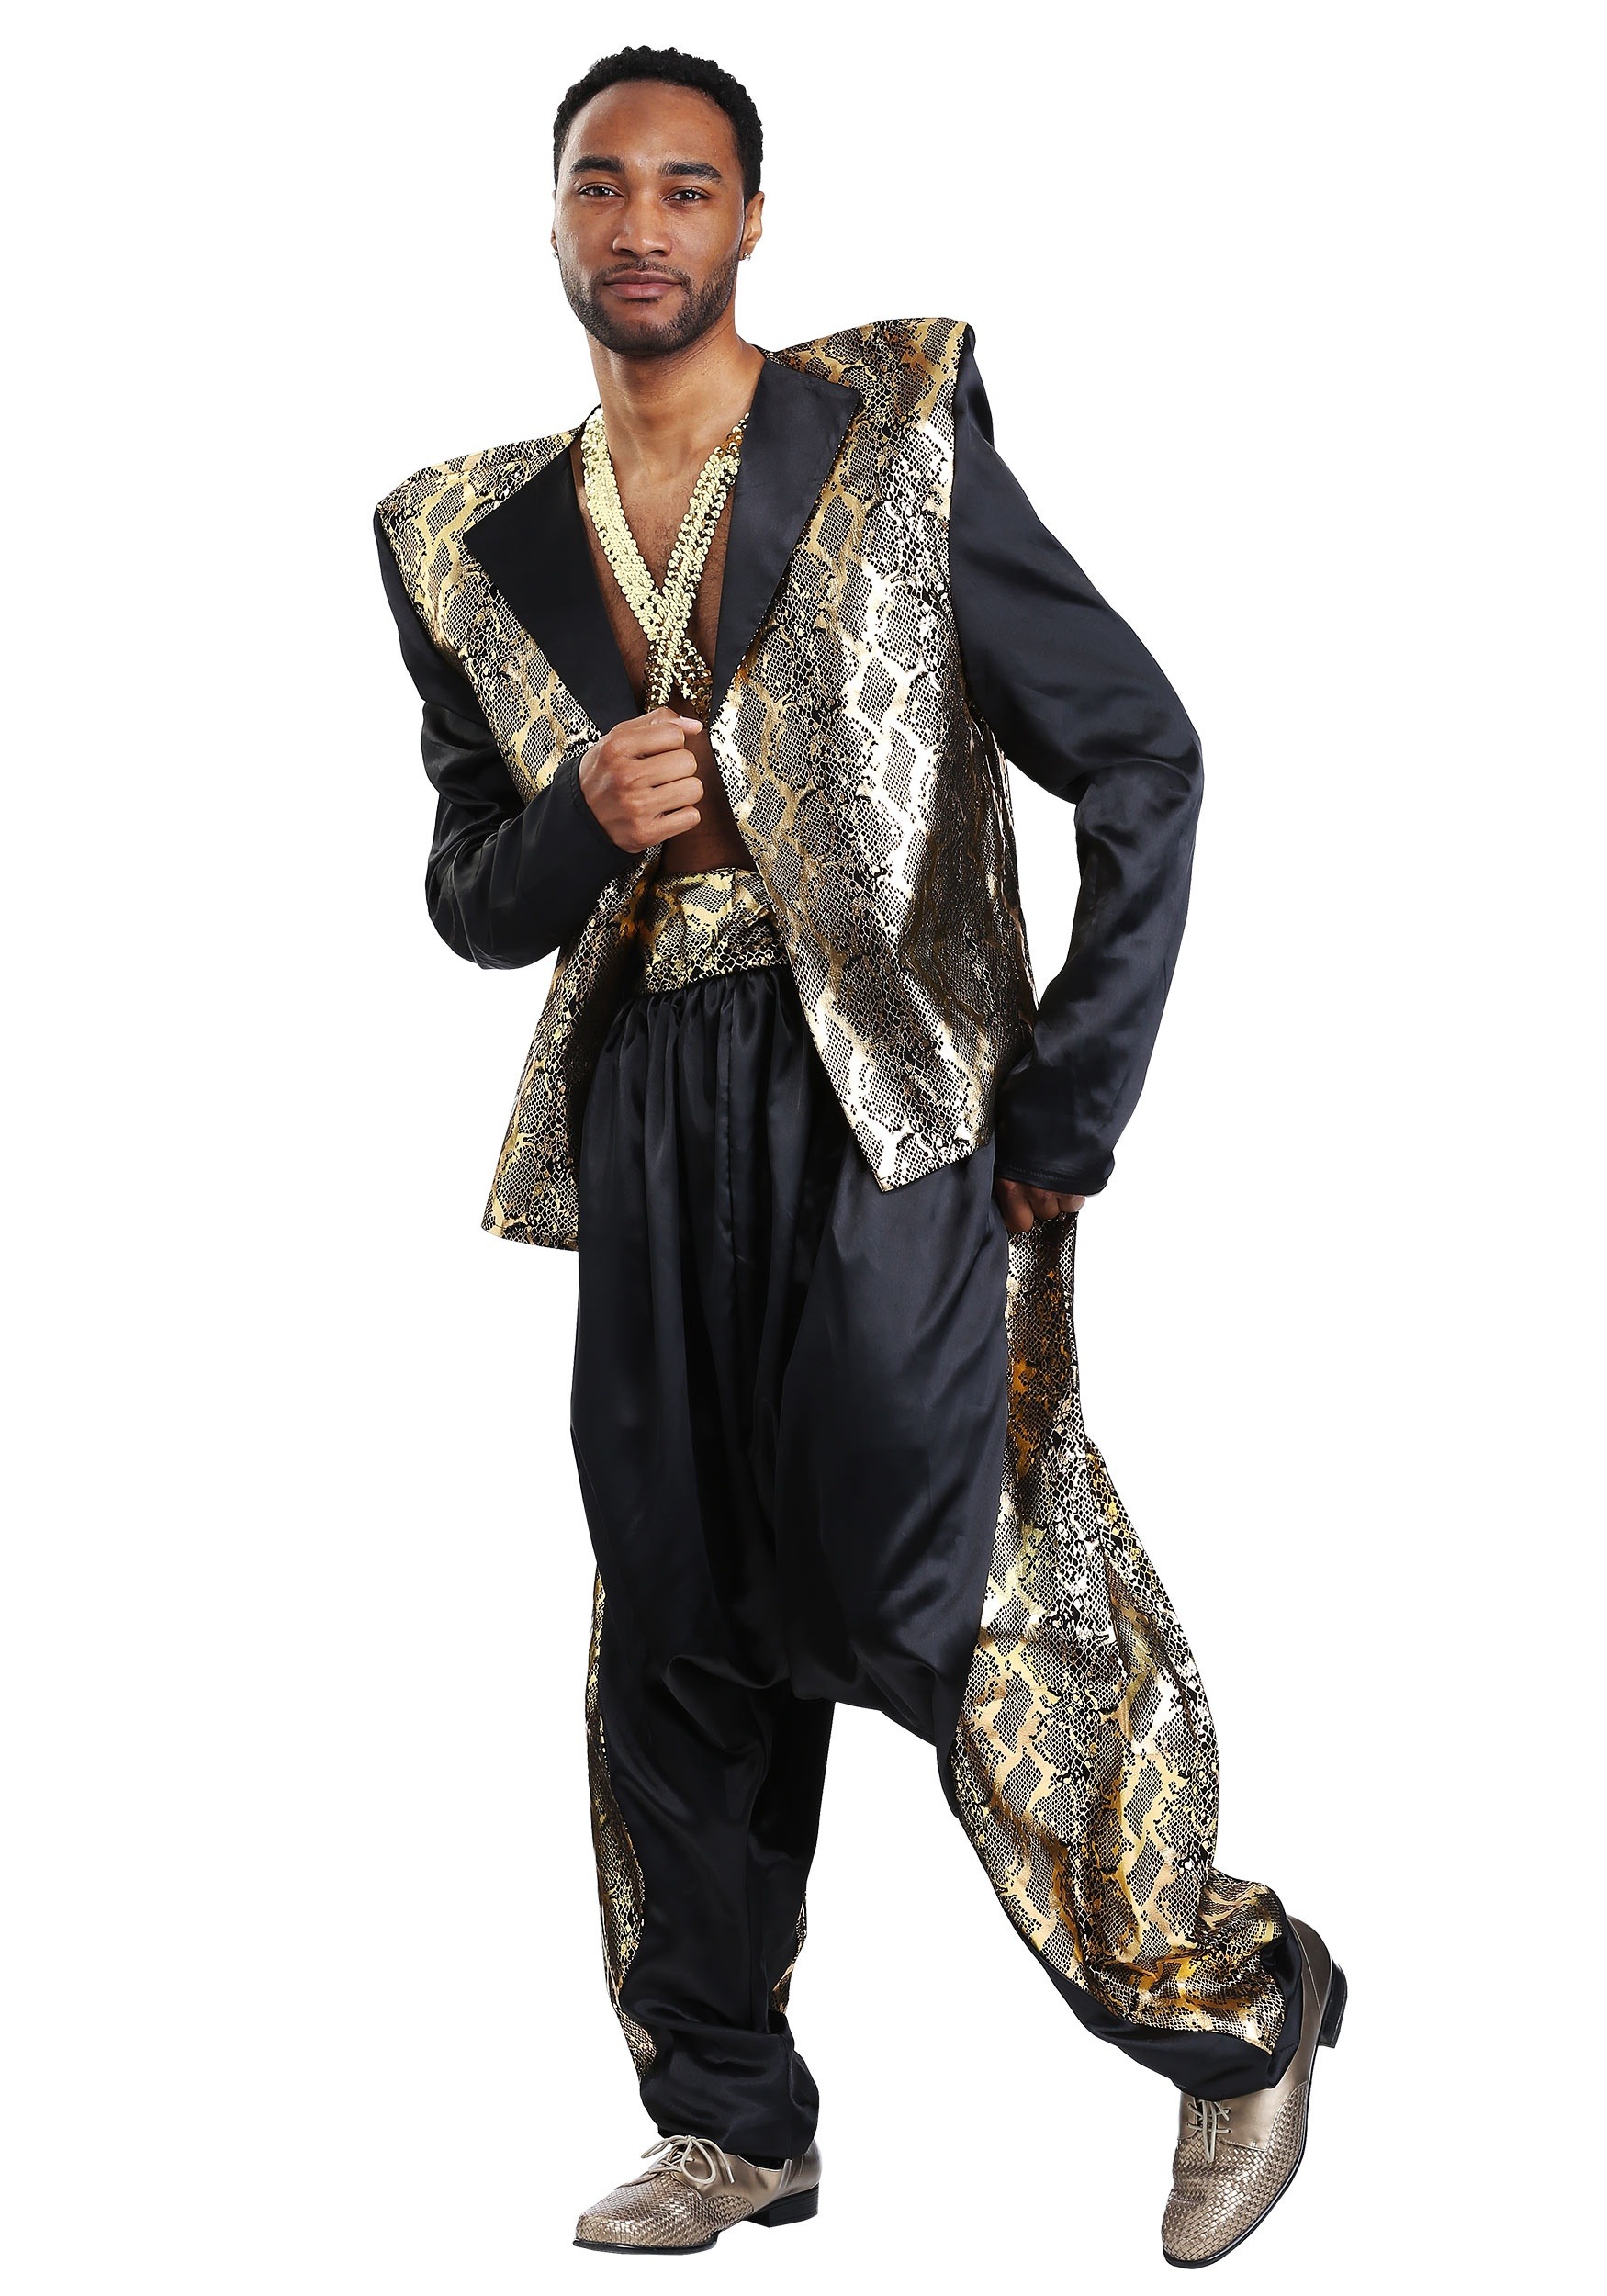 Photos - Fancy Dress Celebrity FUN Costumes Plus Size Can't Touch This Popstar Men's Costume Black/Or 